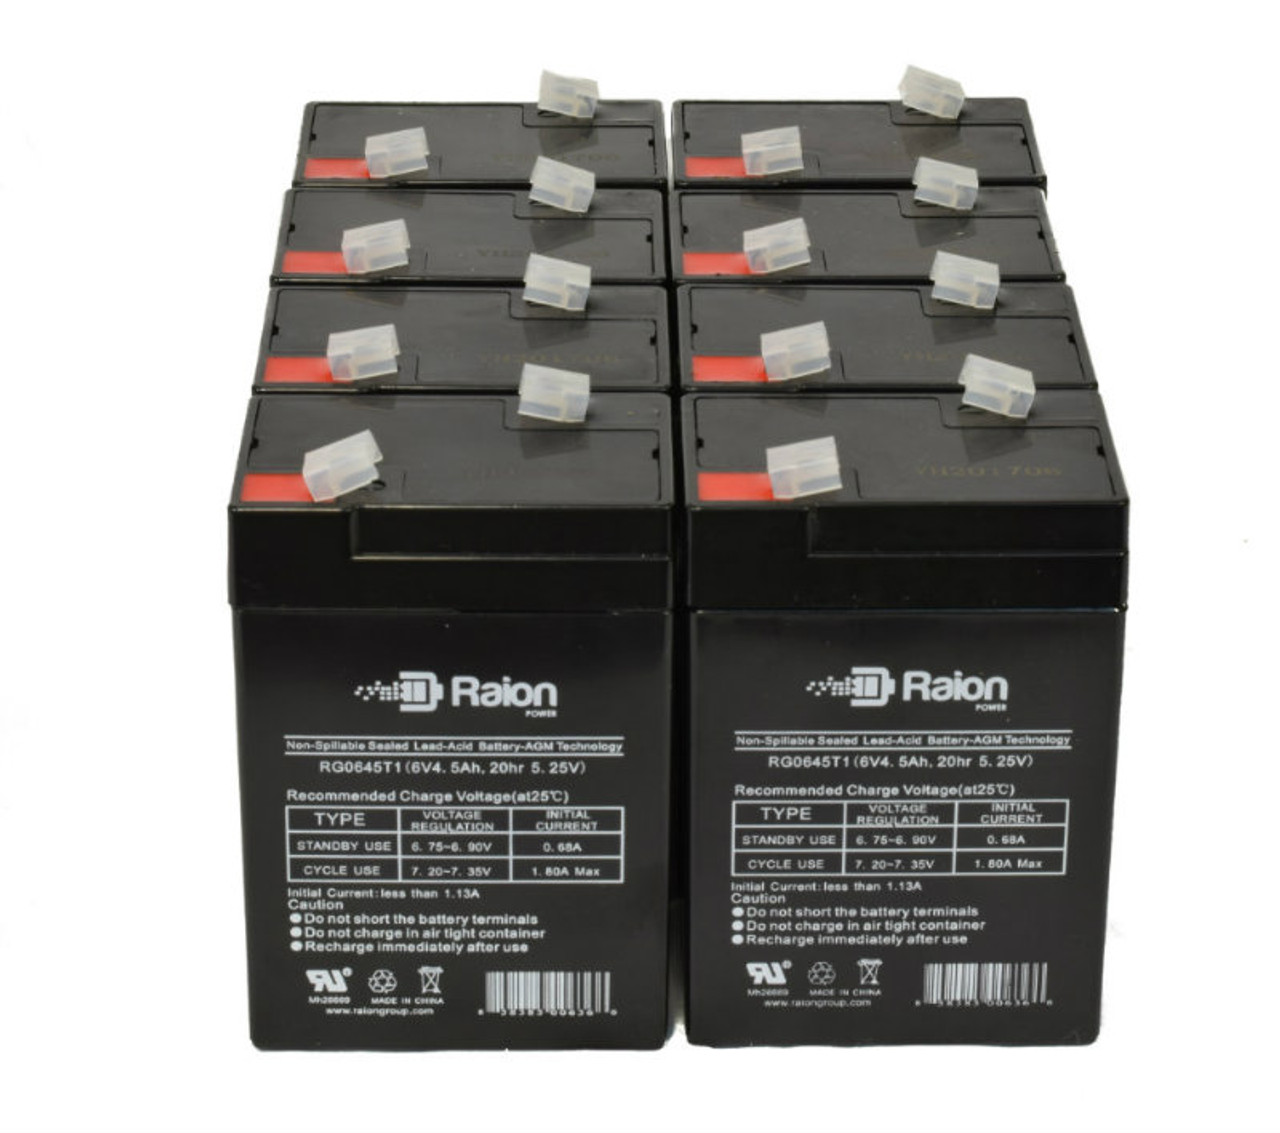 Raion Power 6V 4.5Ah Replacement Emergency Light Battery for Dual-Lite LTURB - 8 Pack